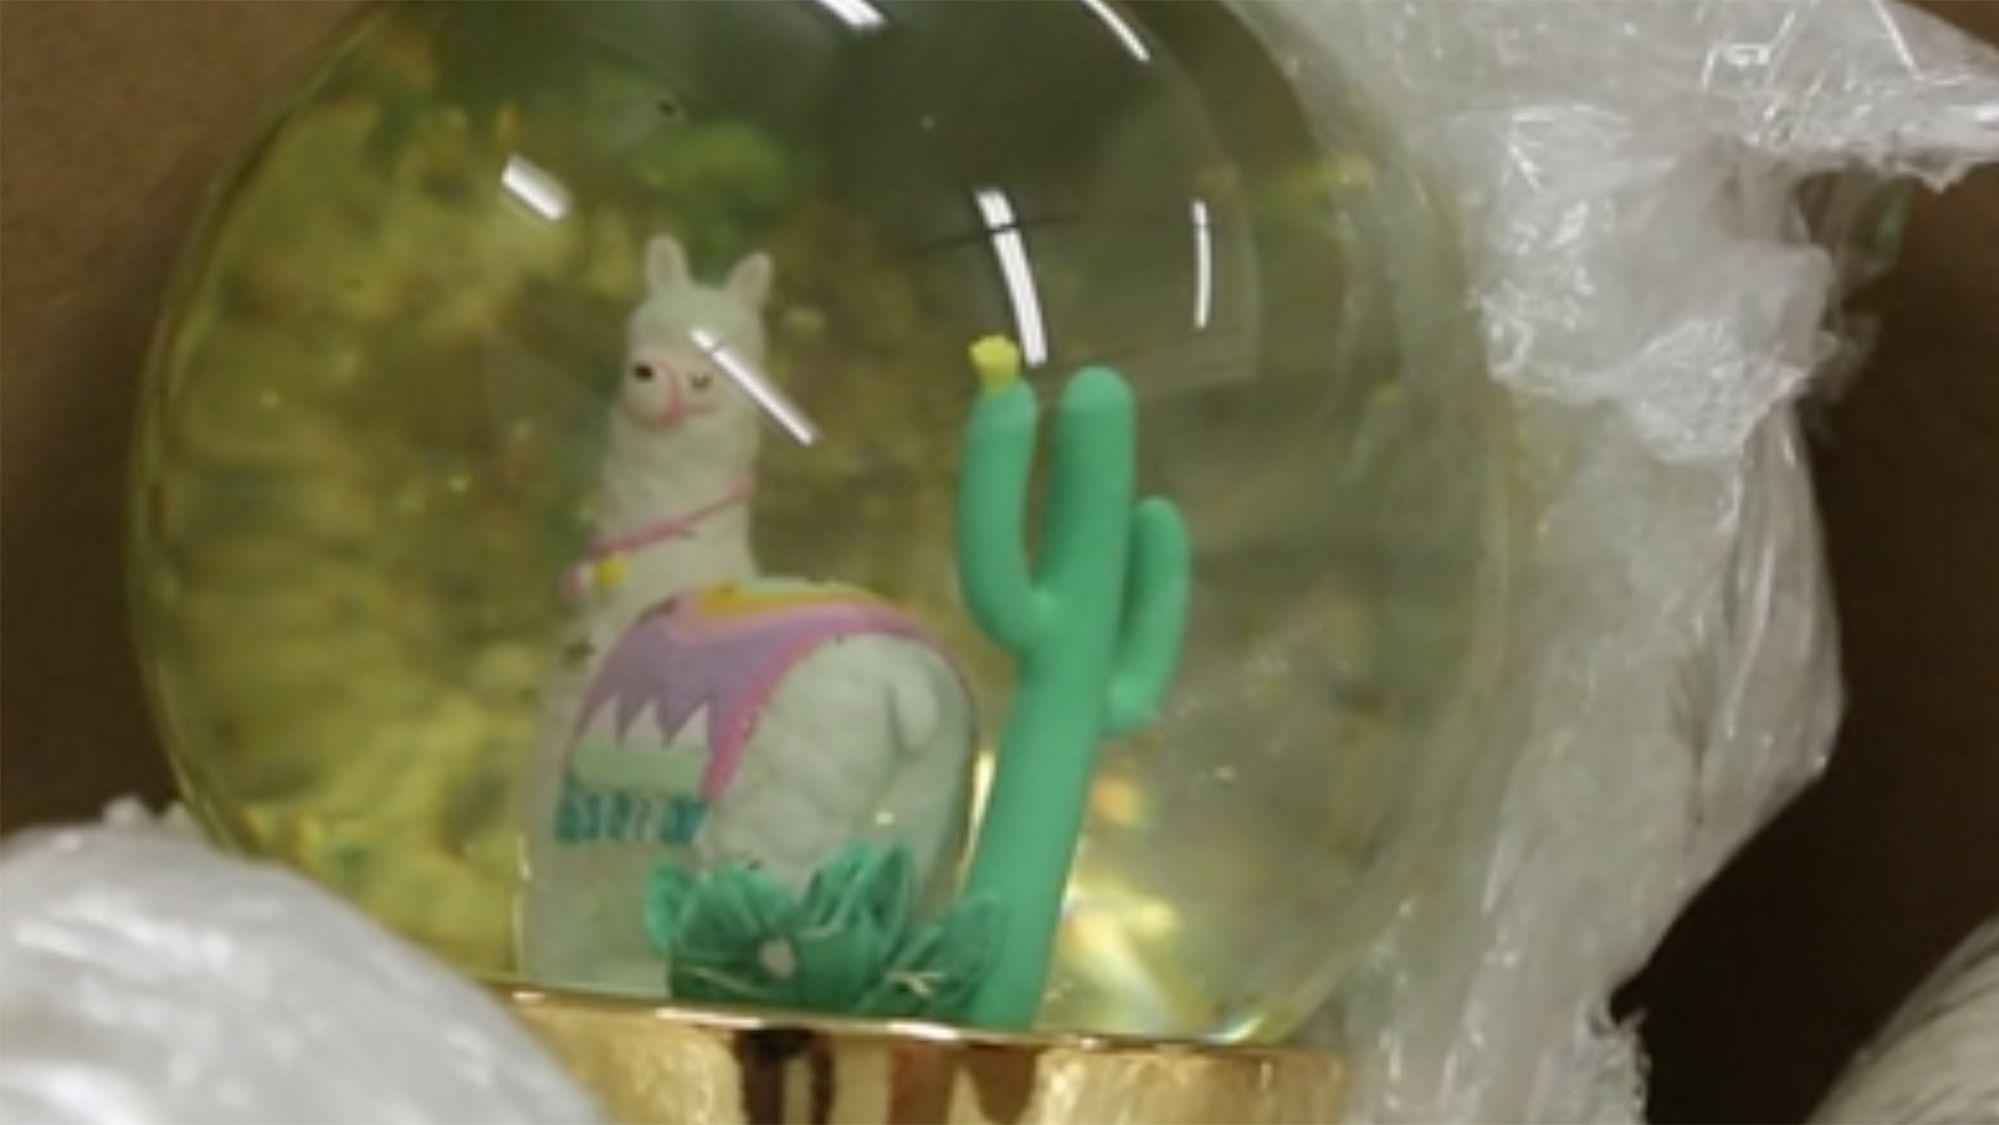 Officials released this photo of a seized snow globe.